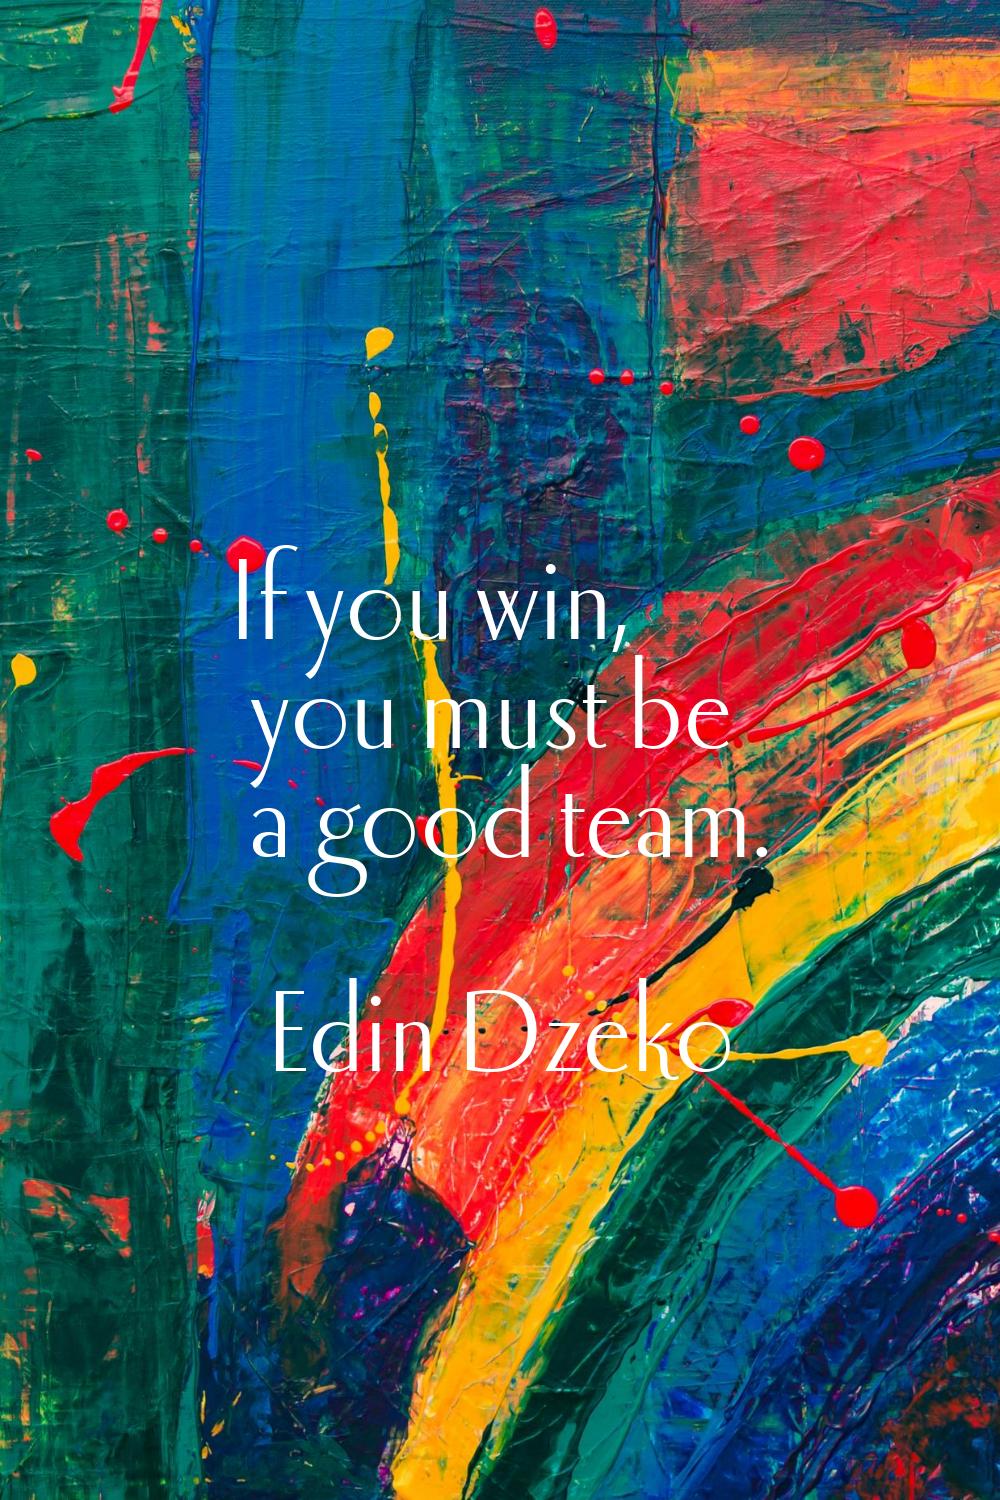 If you win, you must be a good team.